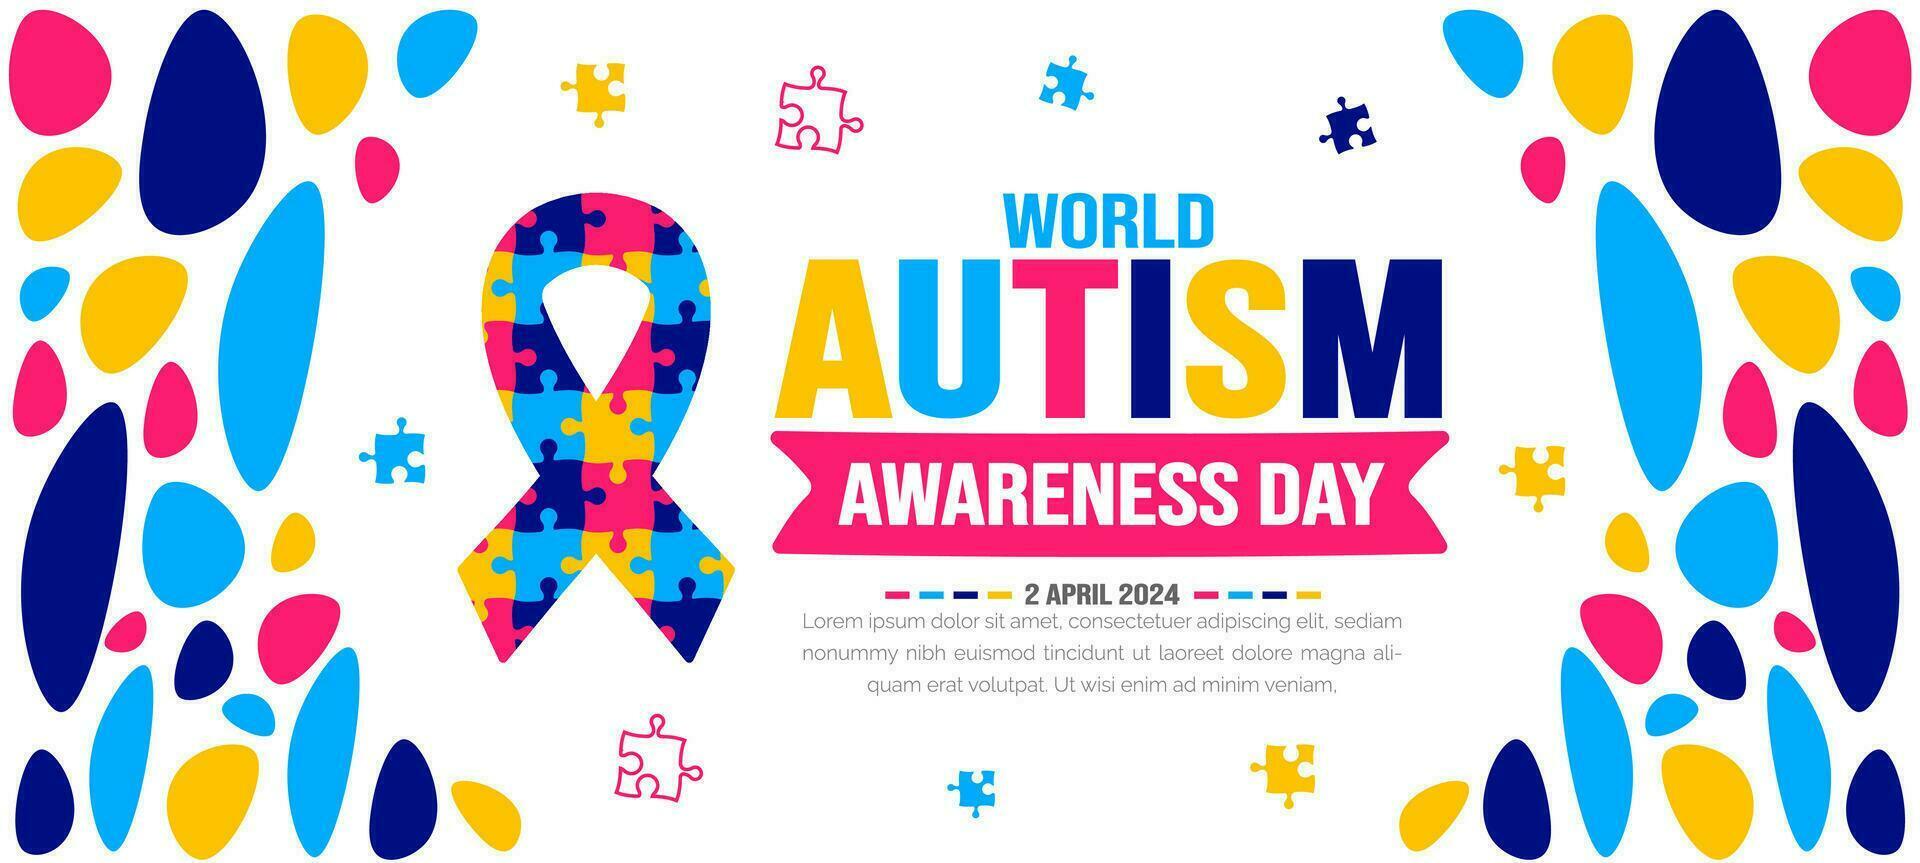 World autism awareness day background template celebrated in 2 April. use to background, banner, card, greeting card, poster, book cover, placard, photo frame, social media post banner template. vector